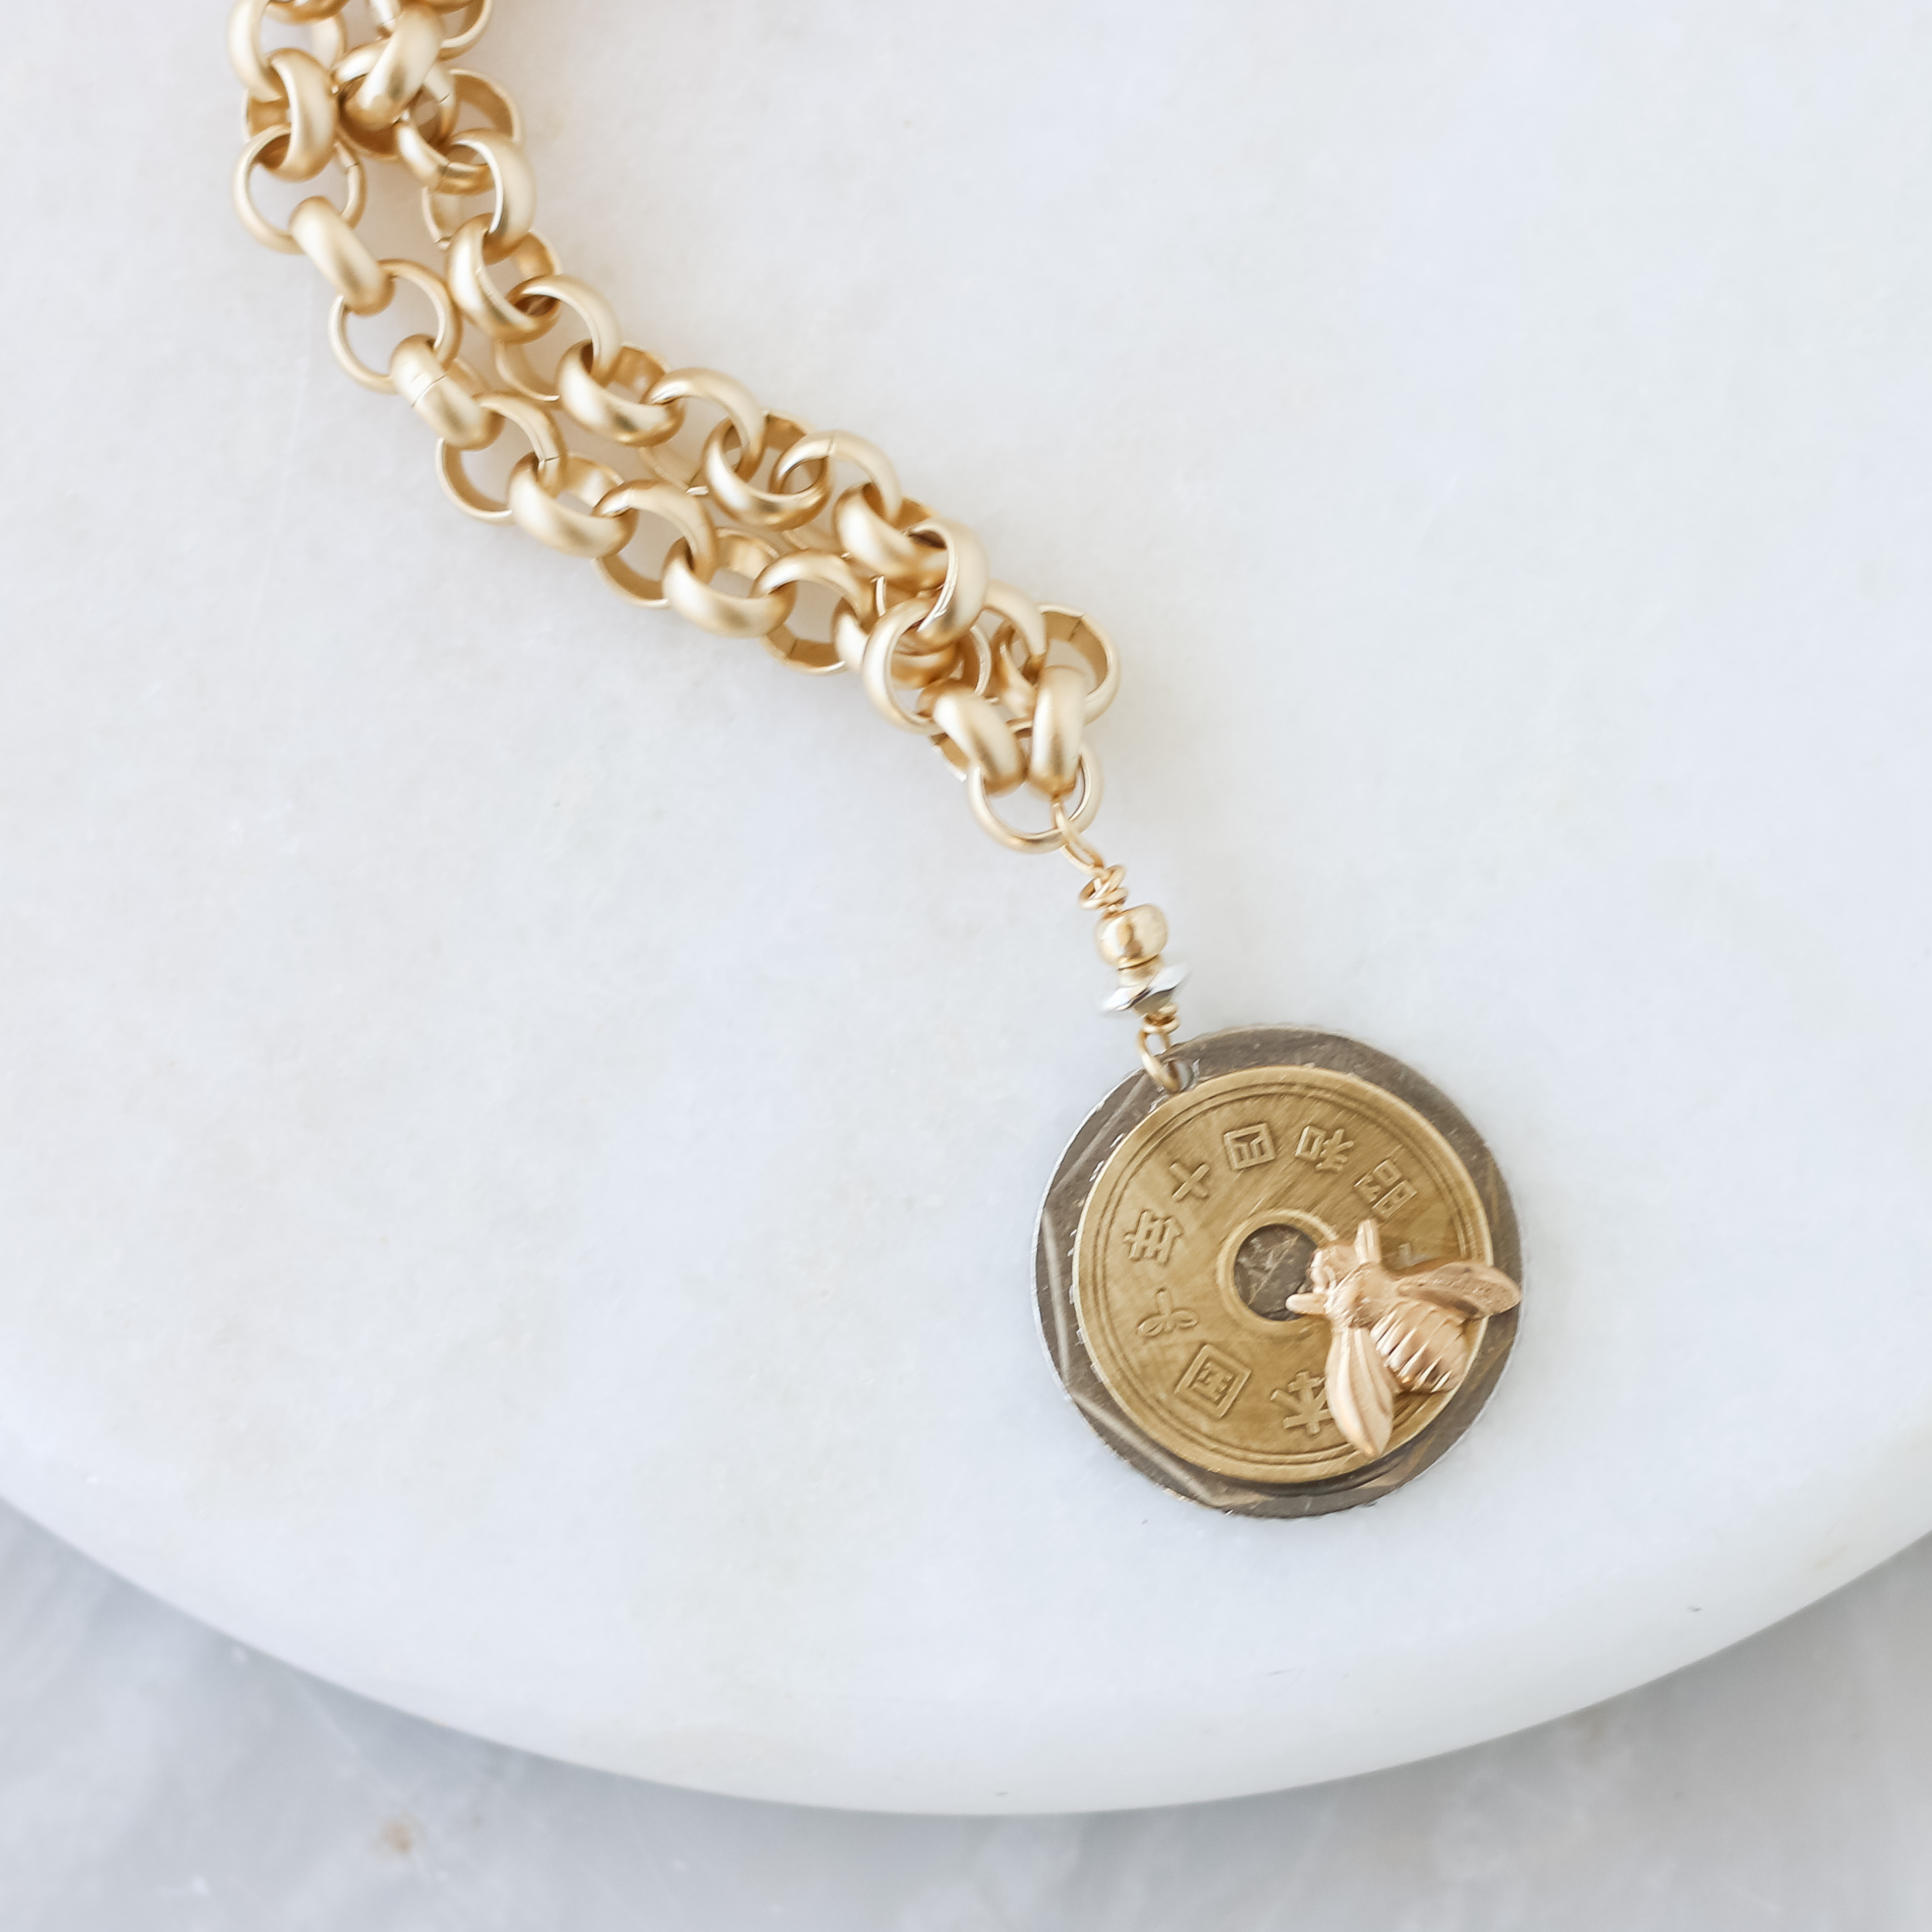 Blooming Flower 21k Gold Coin Necklace | Gold coin necklace, Coin necklace, Gold  coins